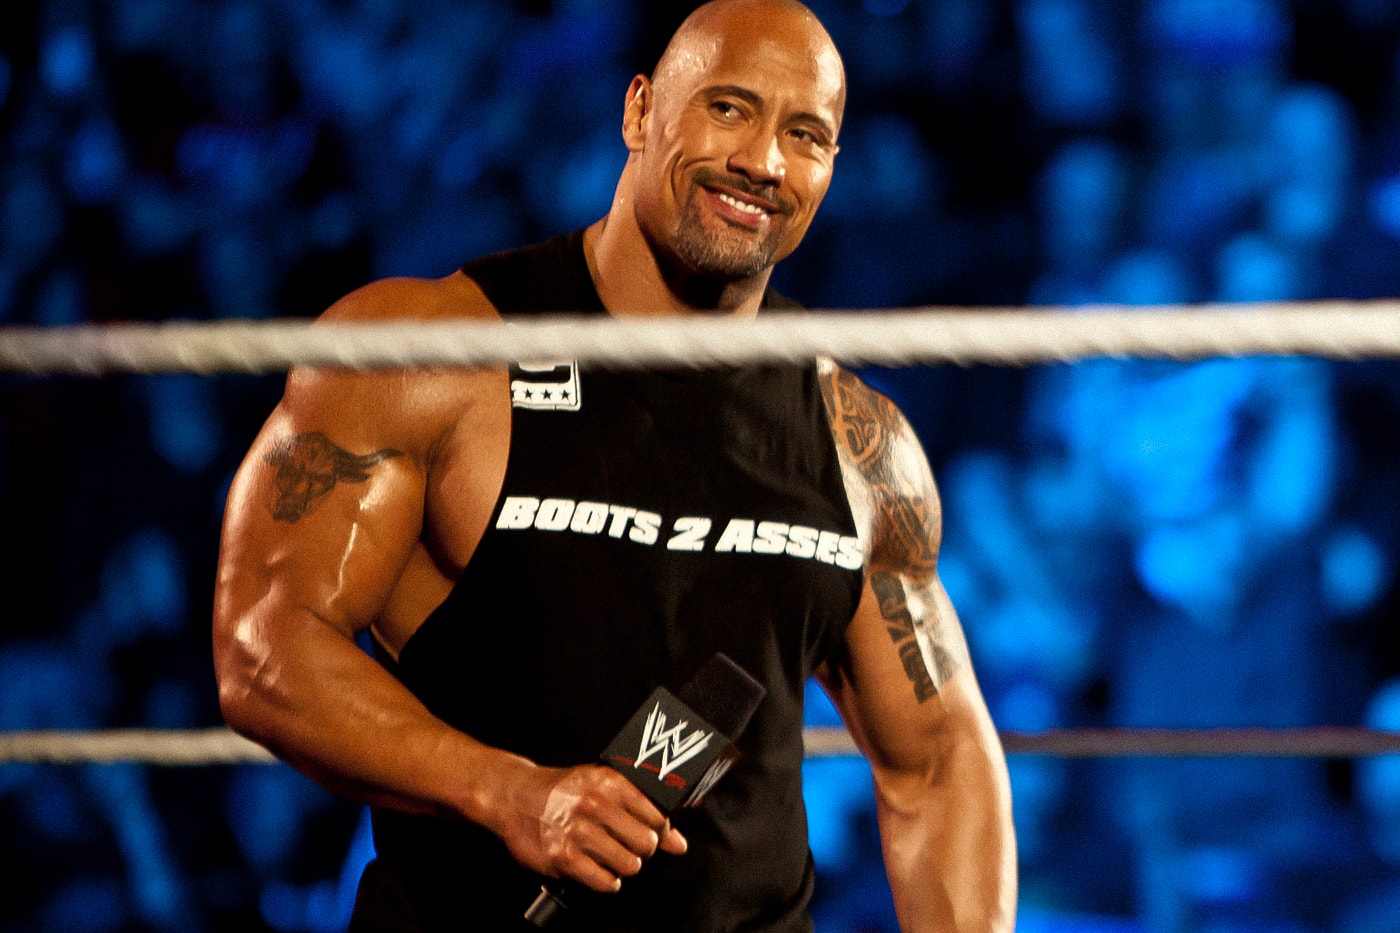 2-time WWE Champion did not want to put over The Rock